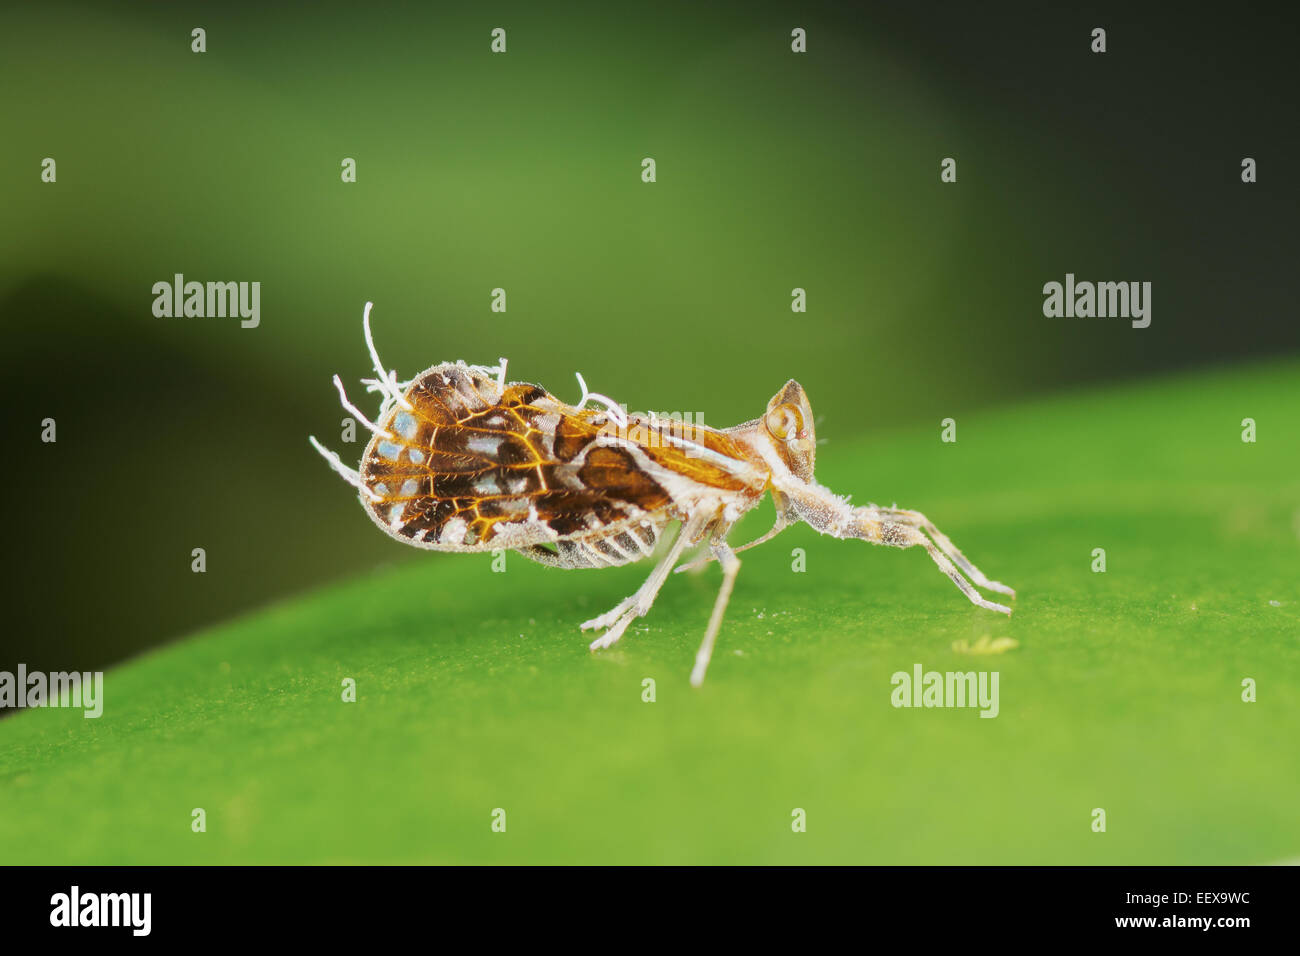 Planthopper (Fulgoromorpha). A planthopper is any insect in the infraorder Fulgoromorpha within the Hemiptera Stock Photo